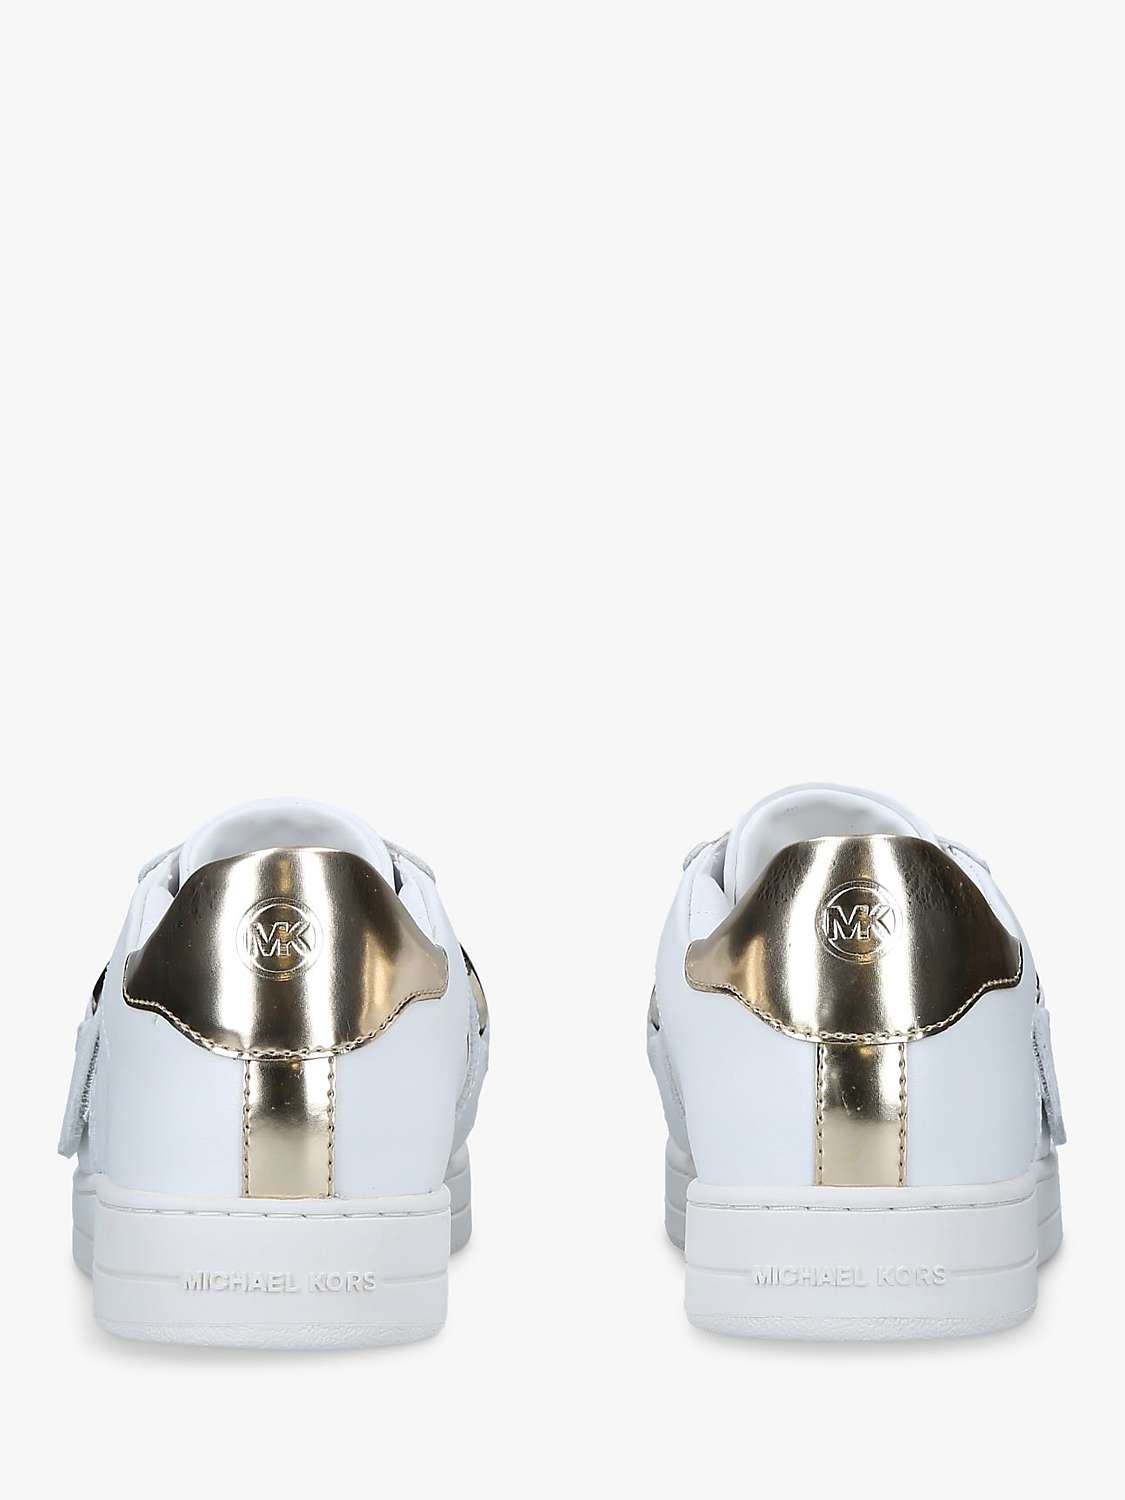 Buy MICHAEL Michael Kors Kenna Chain Link Leather Trainers, White Online at johnlewis.com